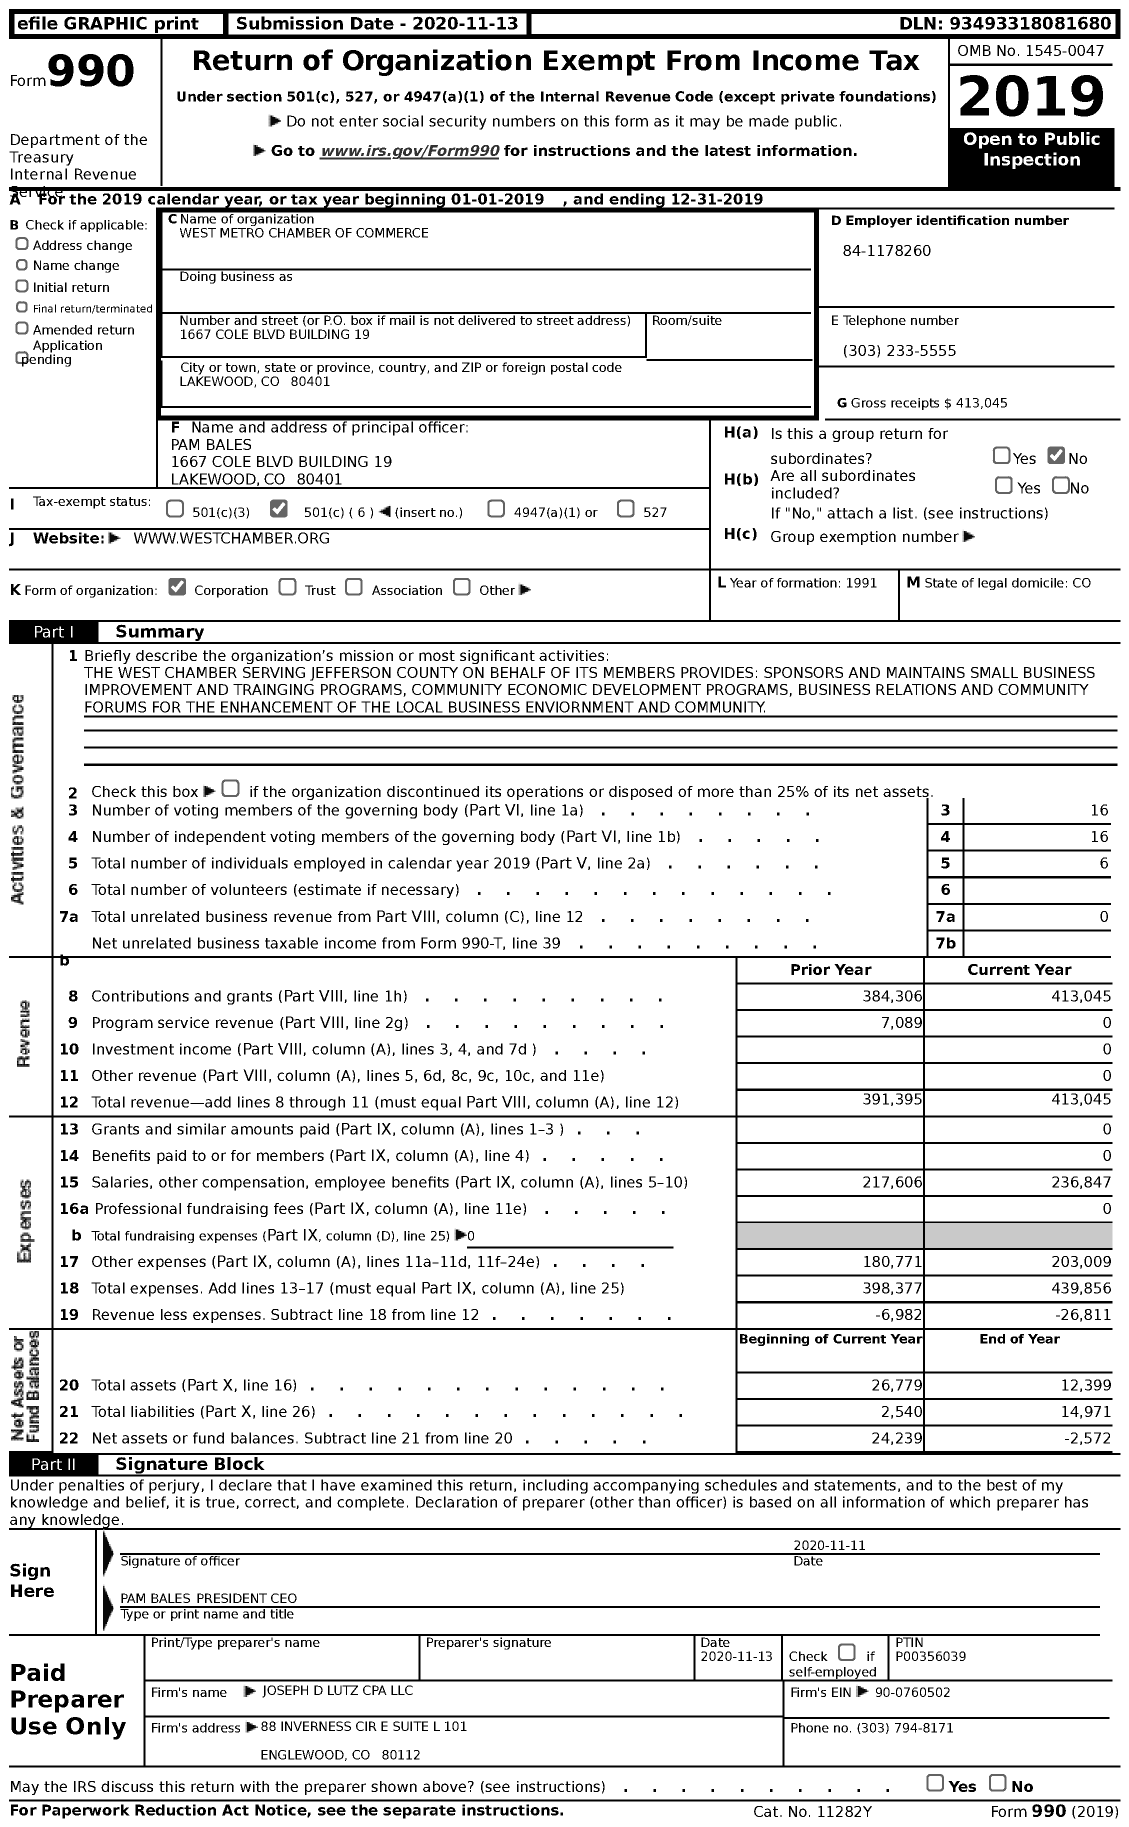 Image of first page of 2019 Form 990 for West Metro Chamber of Commerce